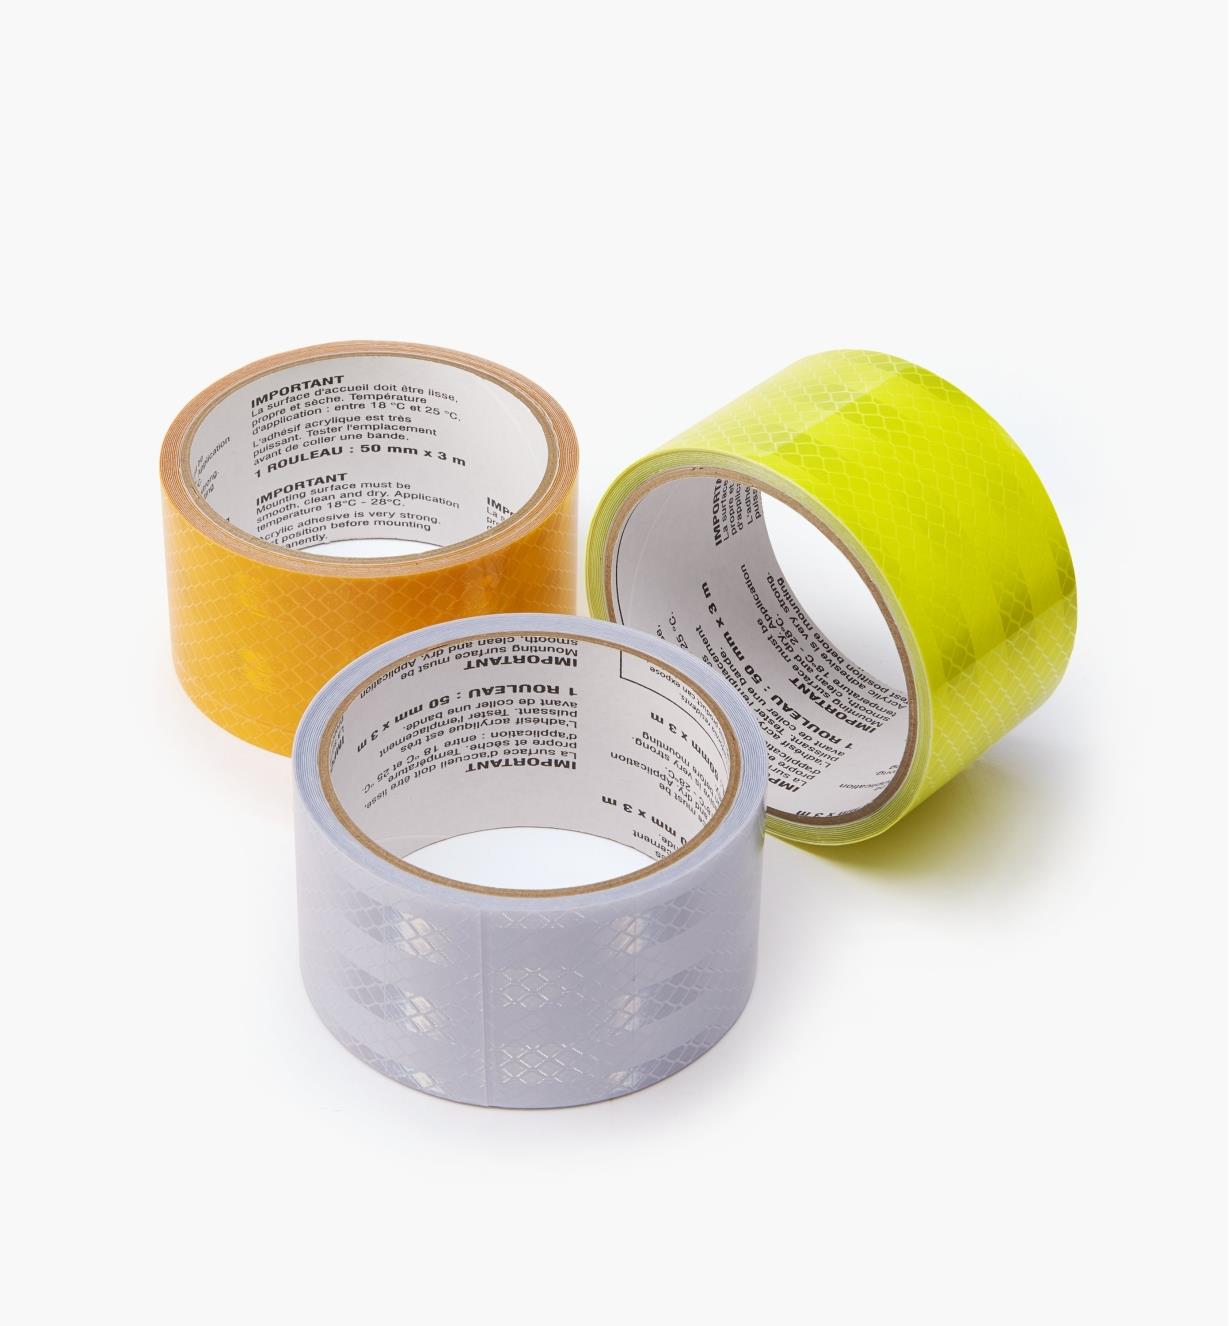 09A0951 - Reflective Tape, set of 3